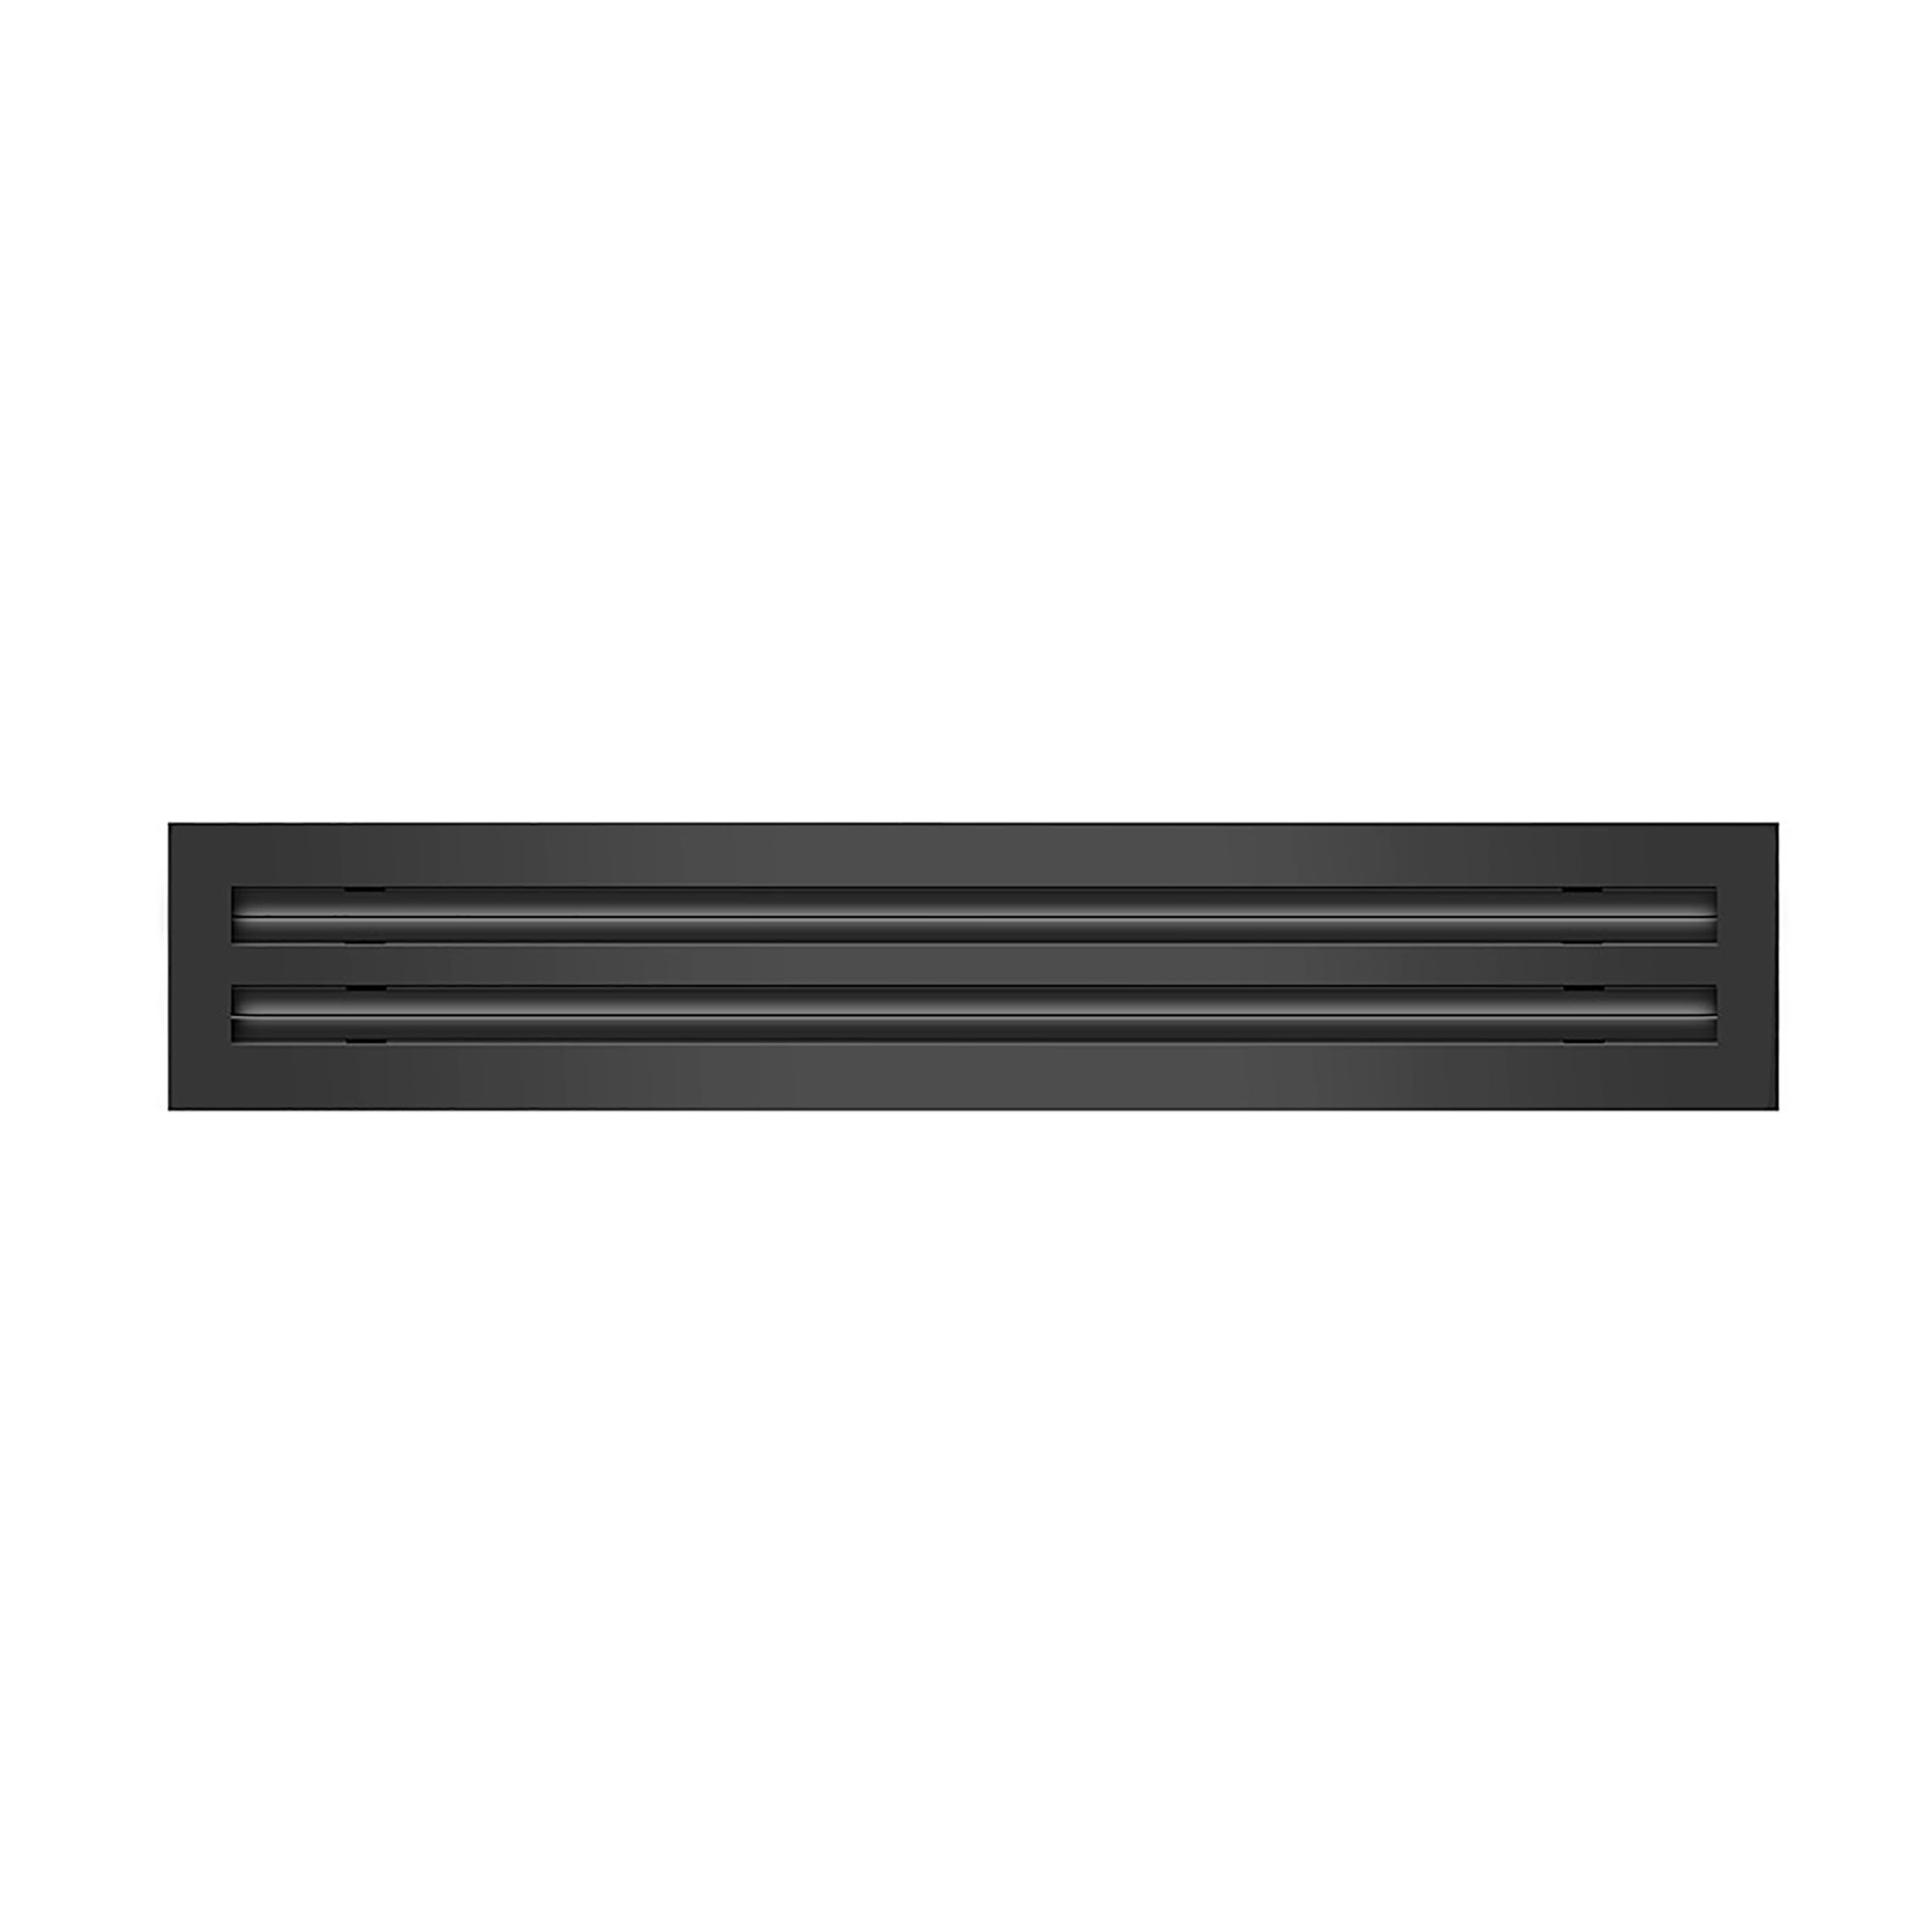 Front of 24 Inch 2 Slot Linear Air Vent Cover Black - 24 Inch 2 Slot Linear Diffuser Black - Texas Buildmart